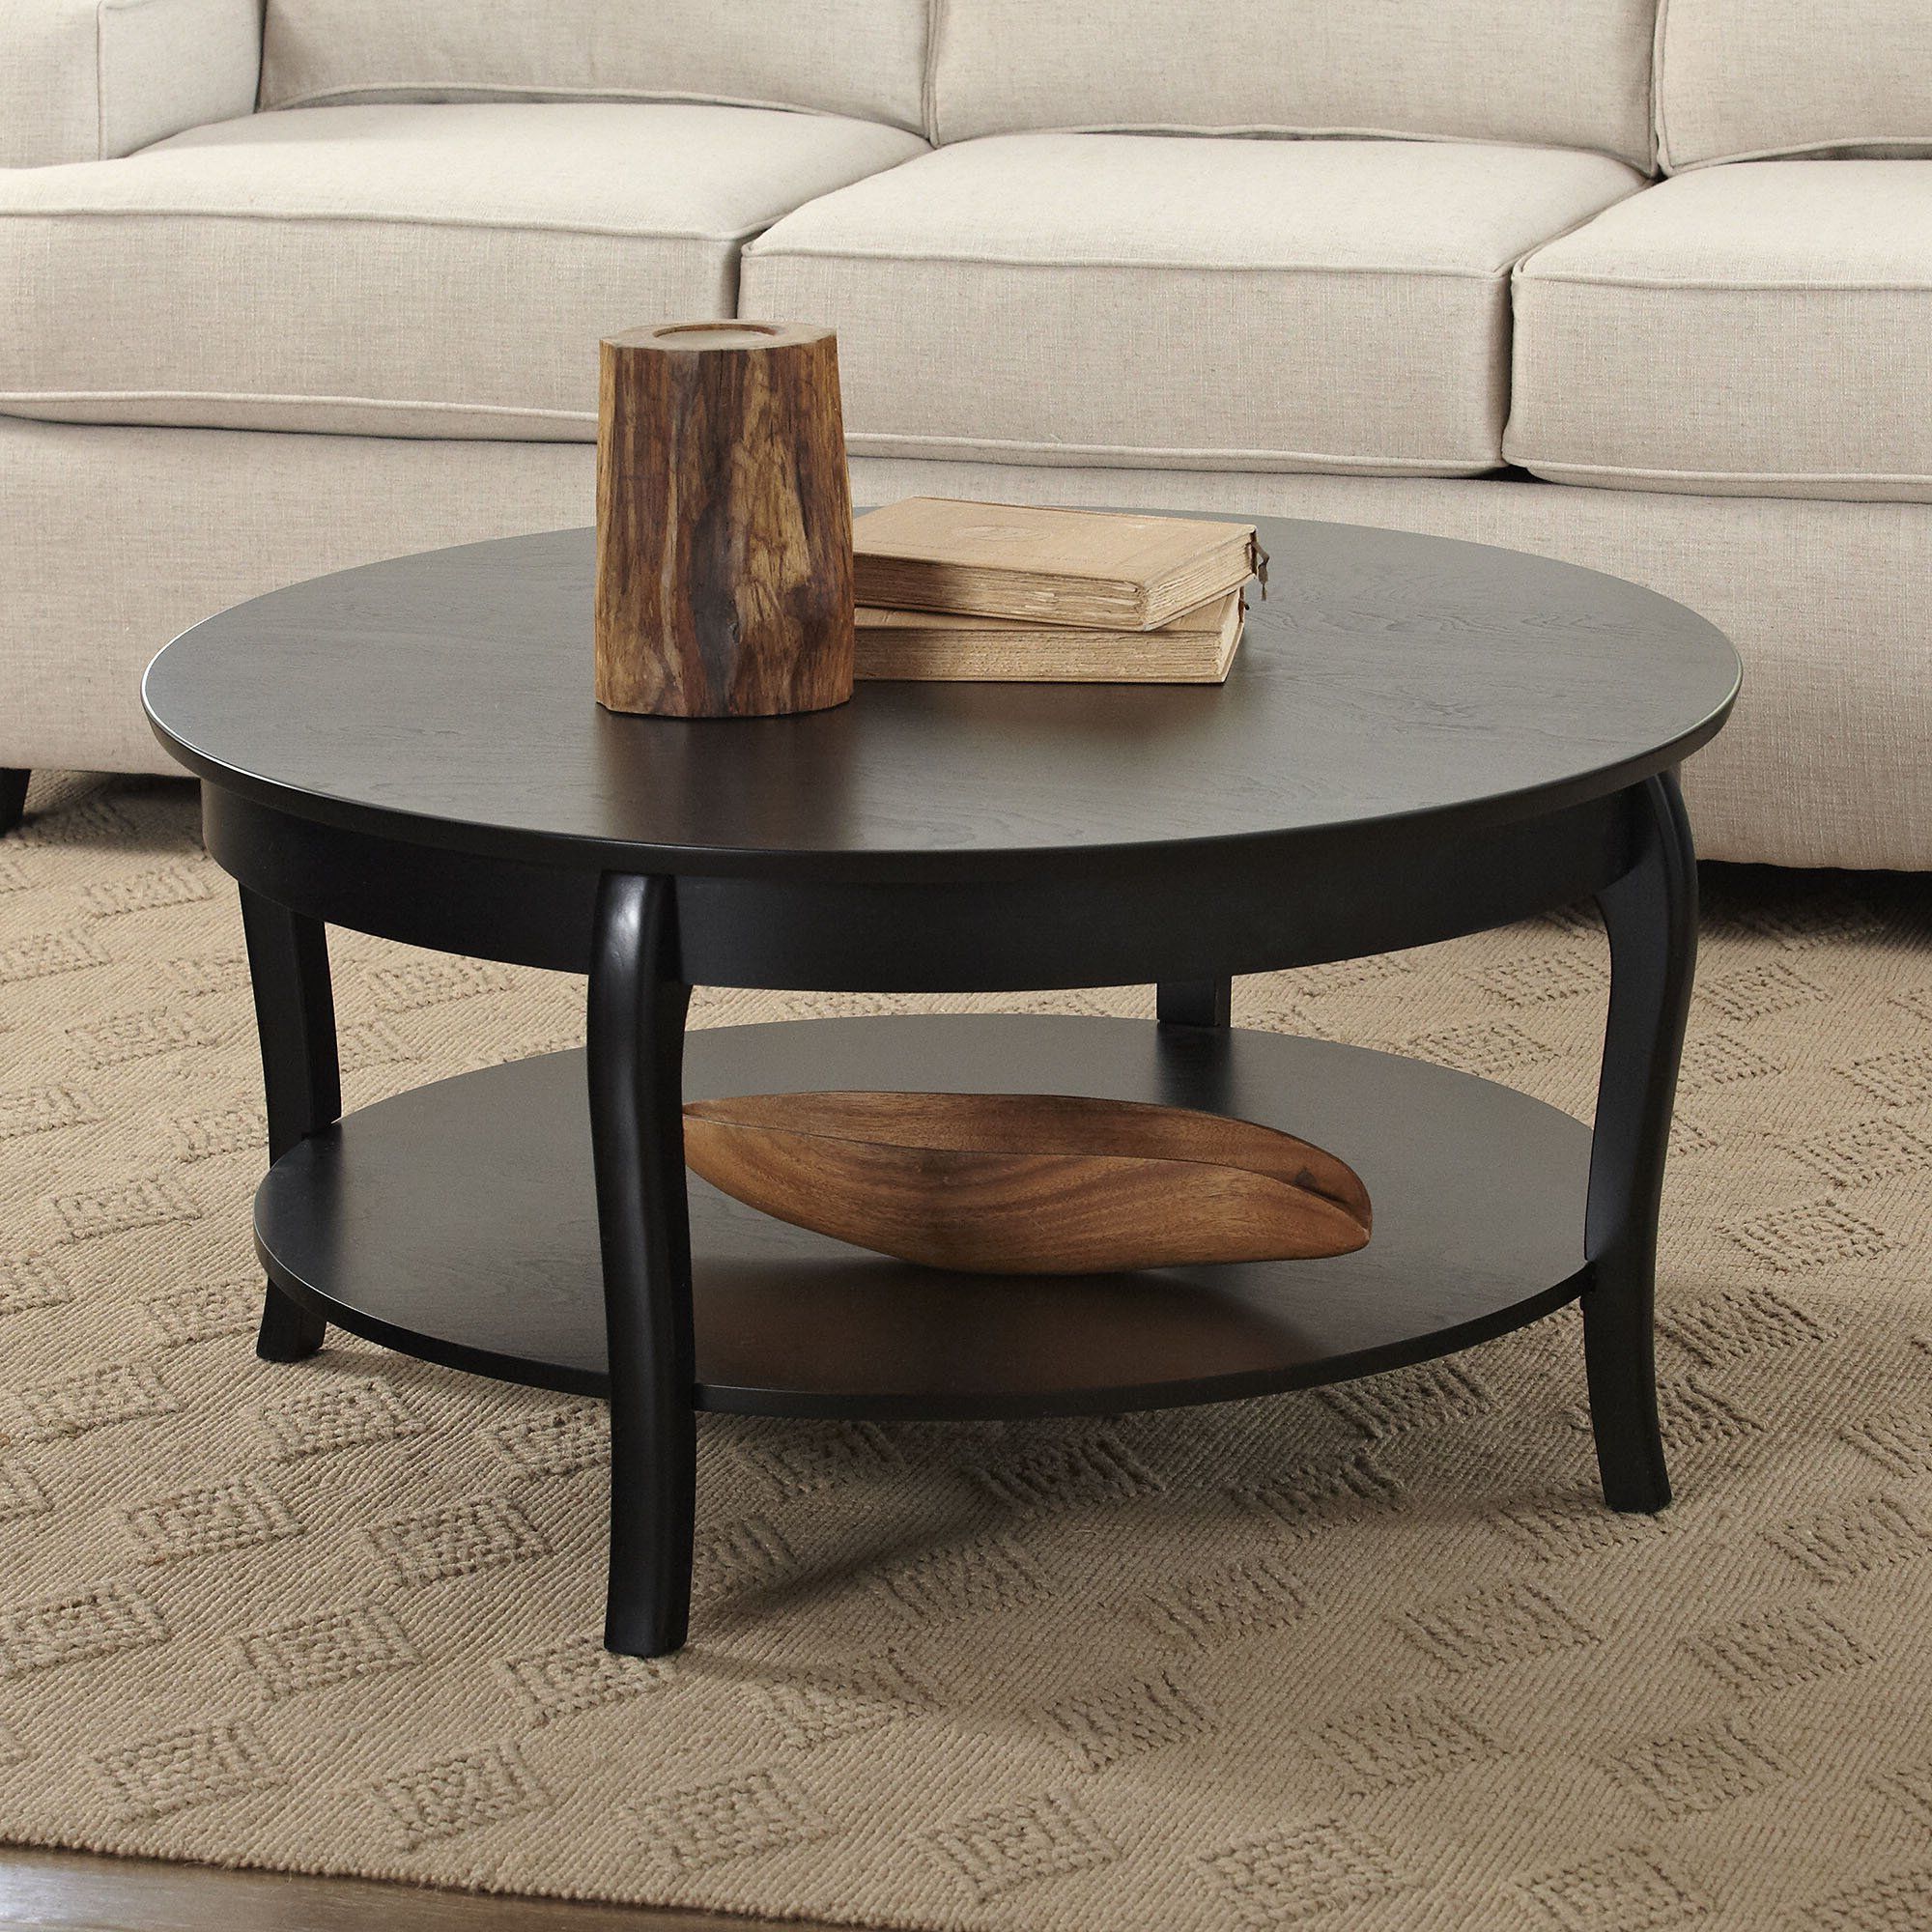 Round Coffee Tables With Well Known Birch Lane Alberts Round Coffee Table & Reviews (View 14 of 15)